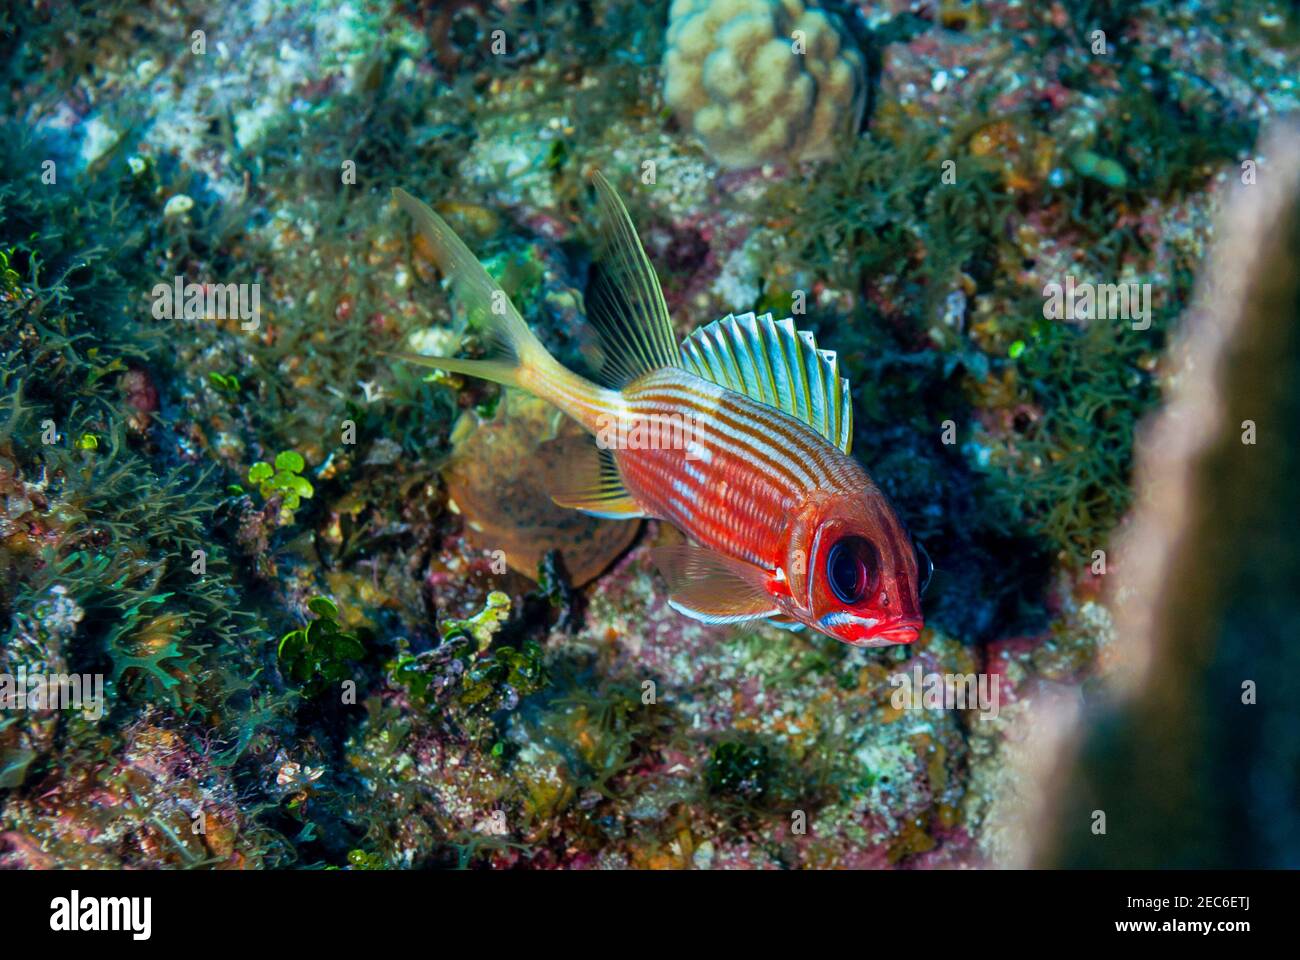 Longjaw Squirrelfish swimming near the reef in the waters of Little Cayman. Stock Photo